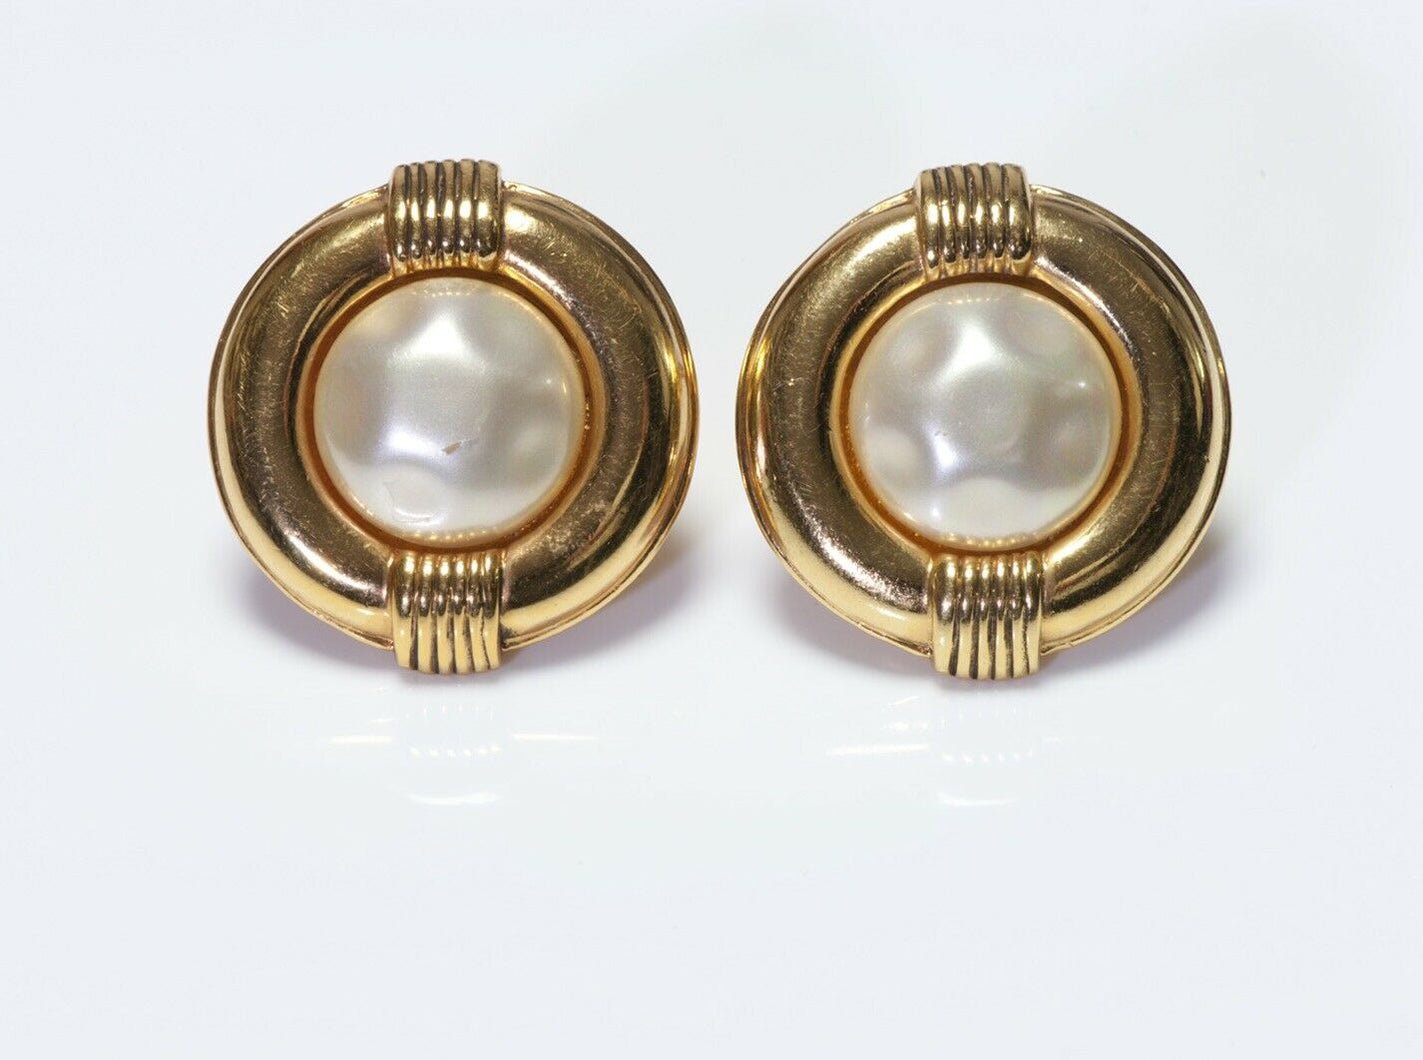 CHANEL Paris 1980’s Gold Plated Pearl Round Earrings